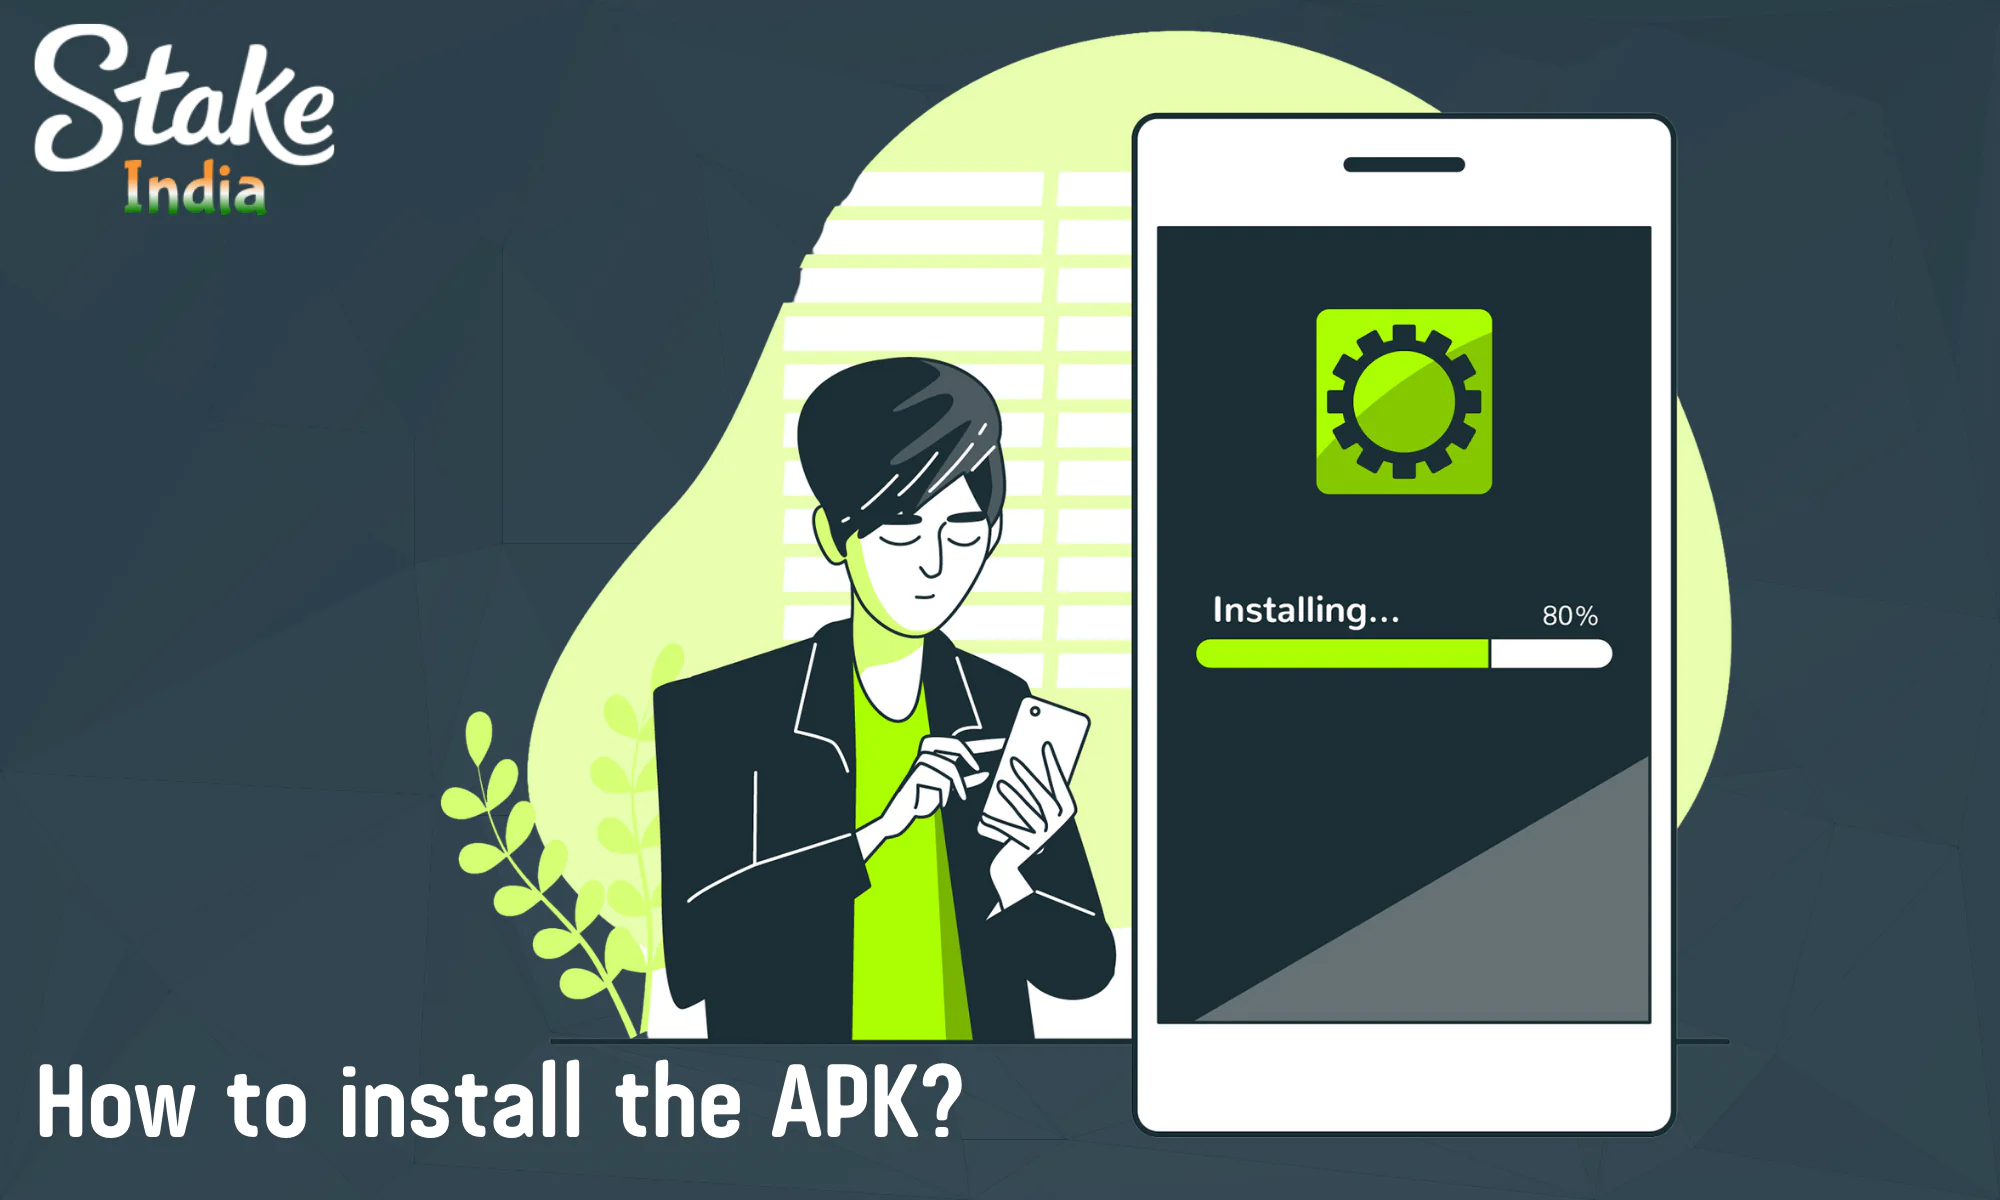 Step by step how to install Stake APK on Android